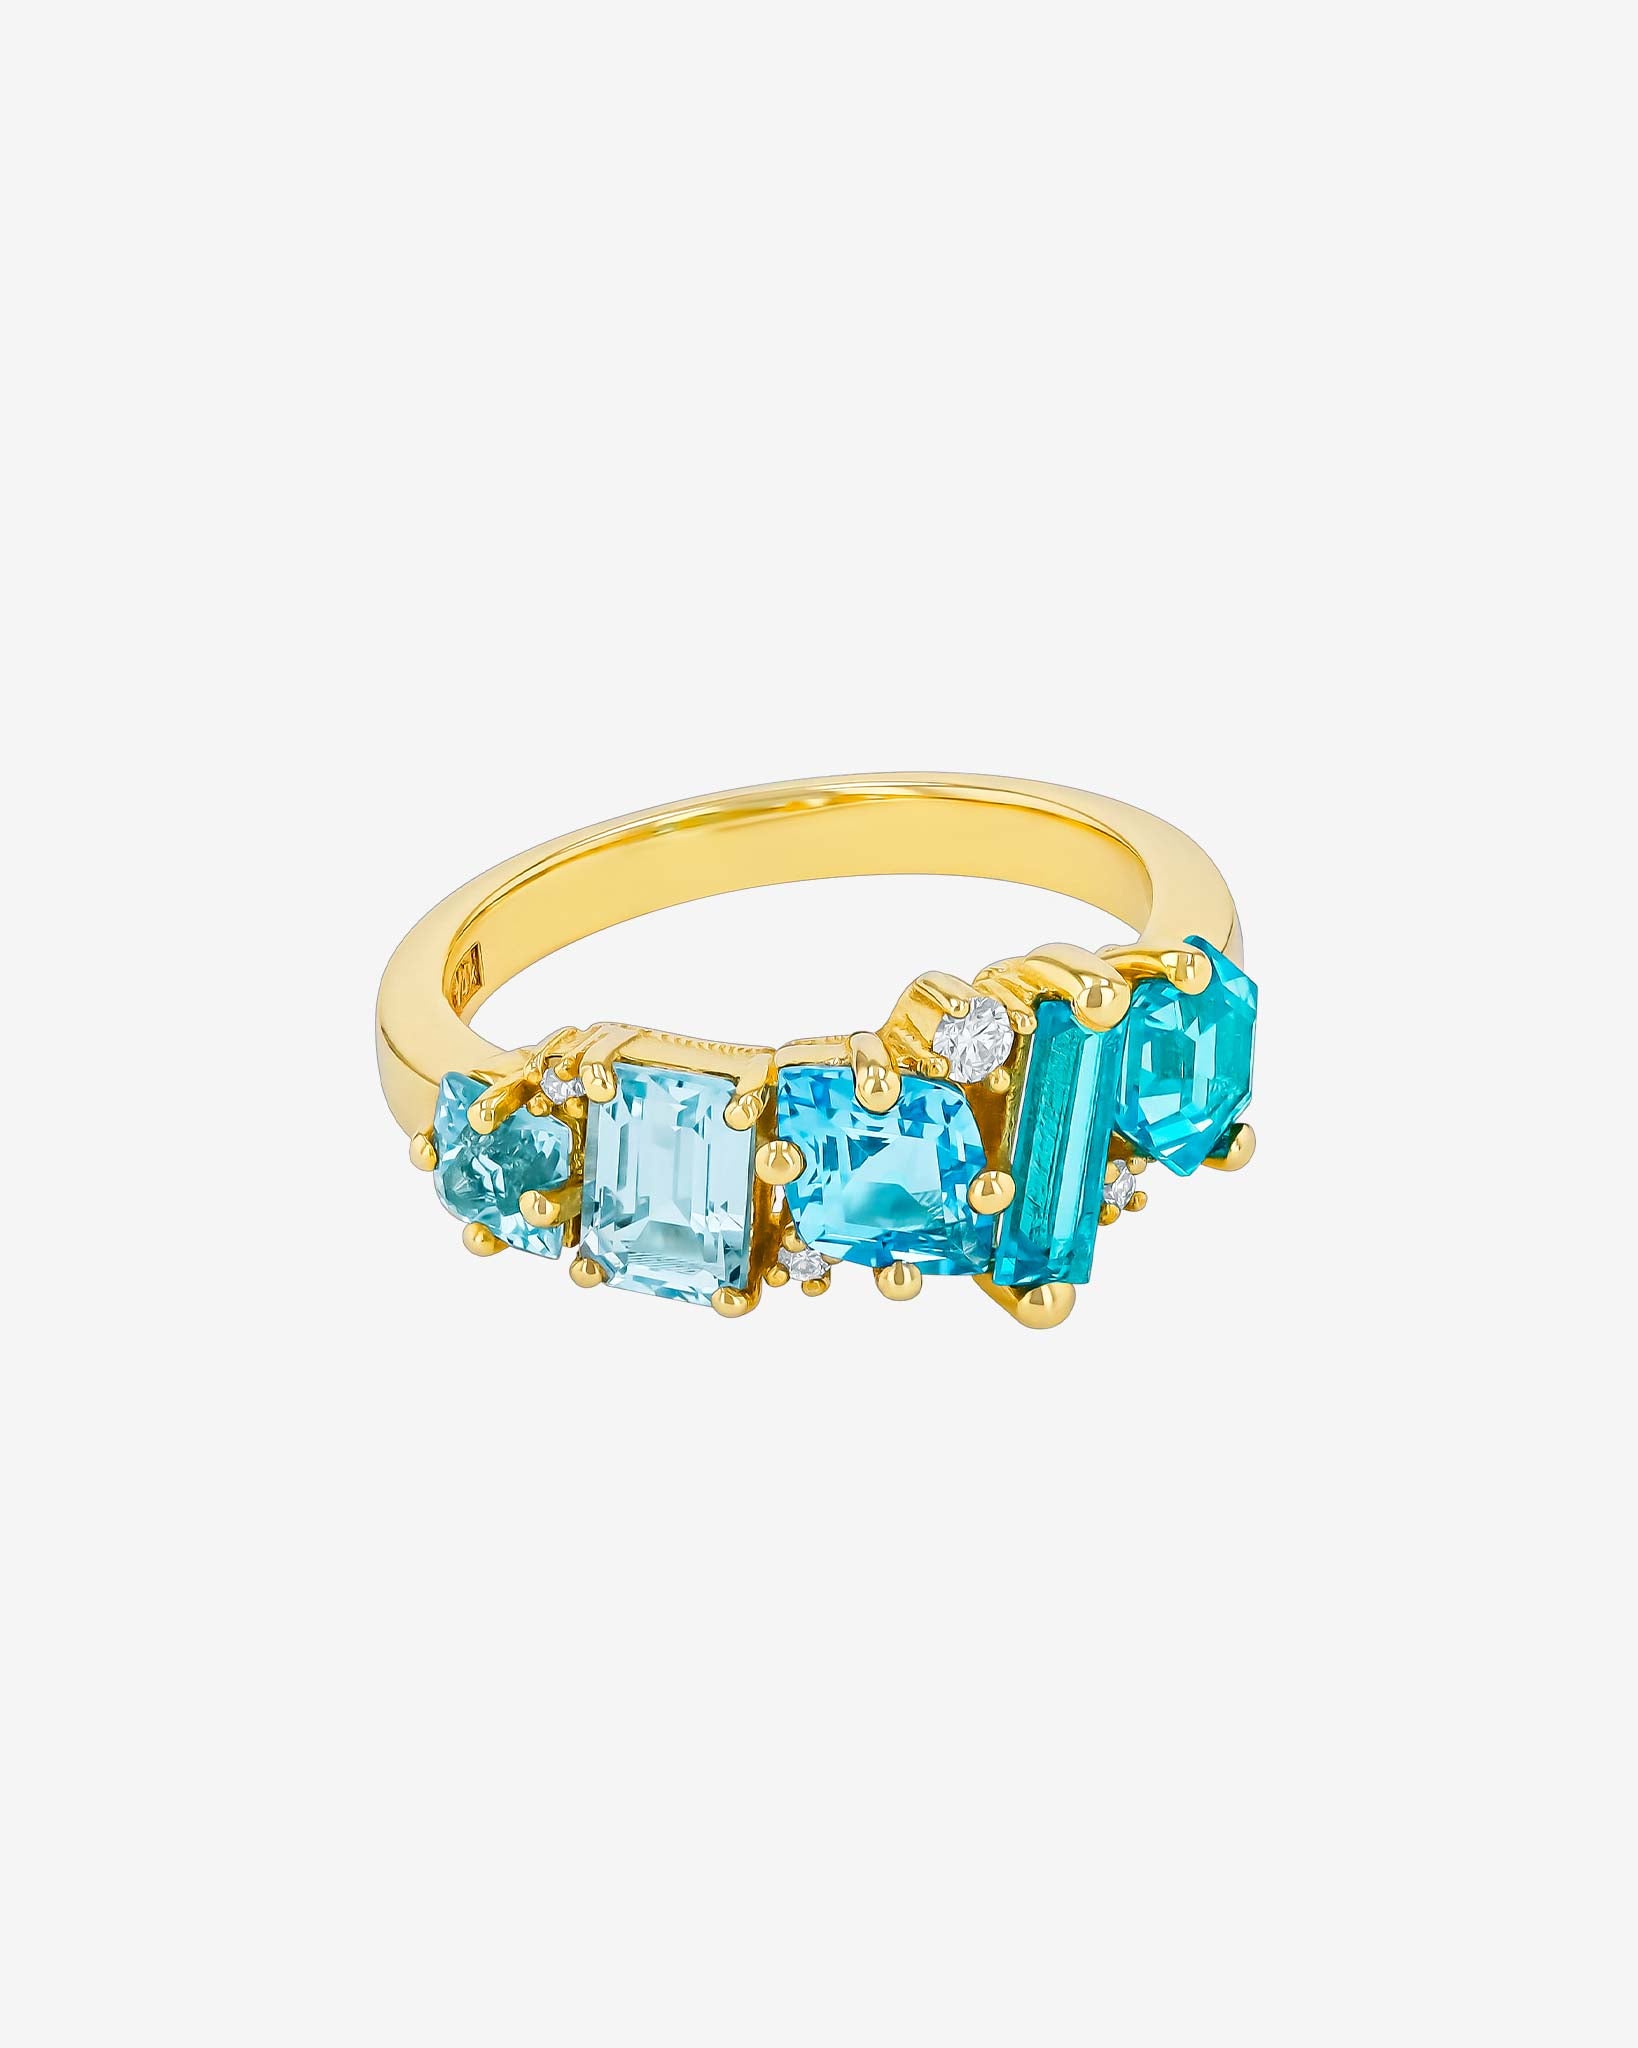 Kalan By Suzanne Kalan Nadima Blend Light Blue Ombre Ring in 14k yellow gold